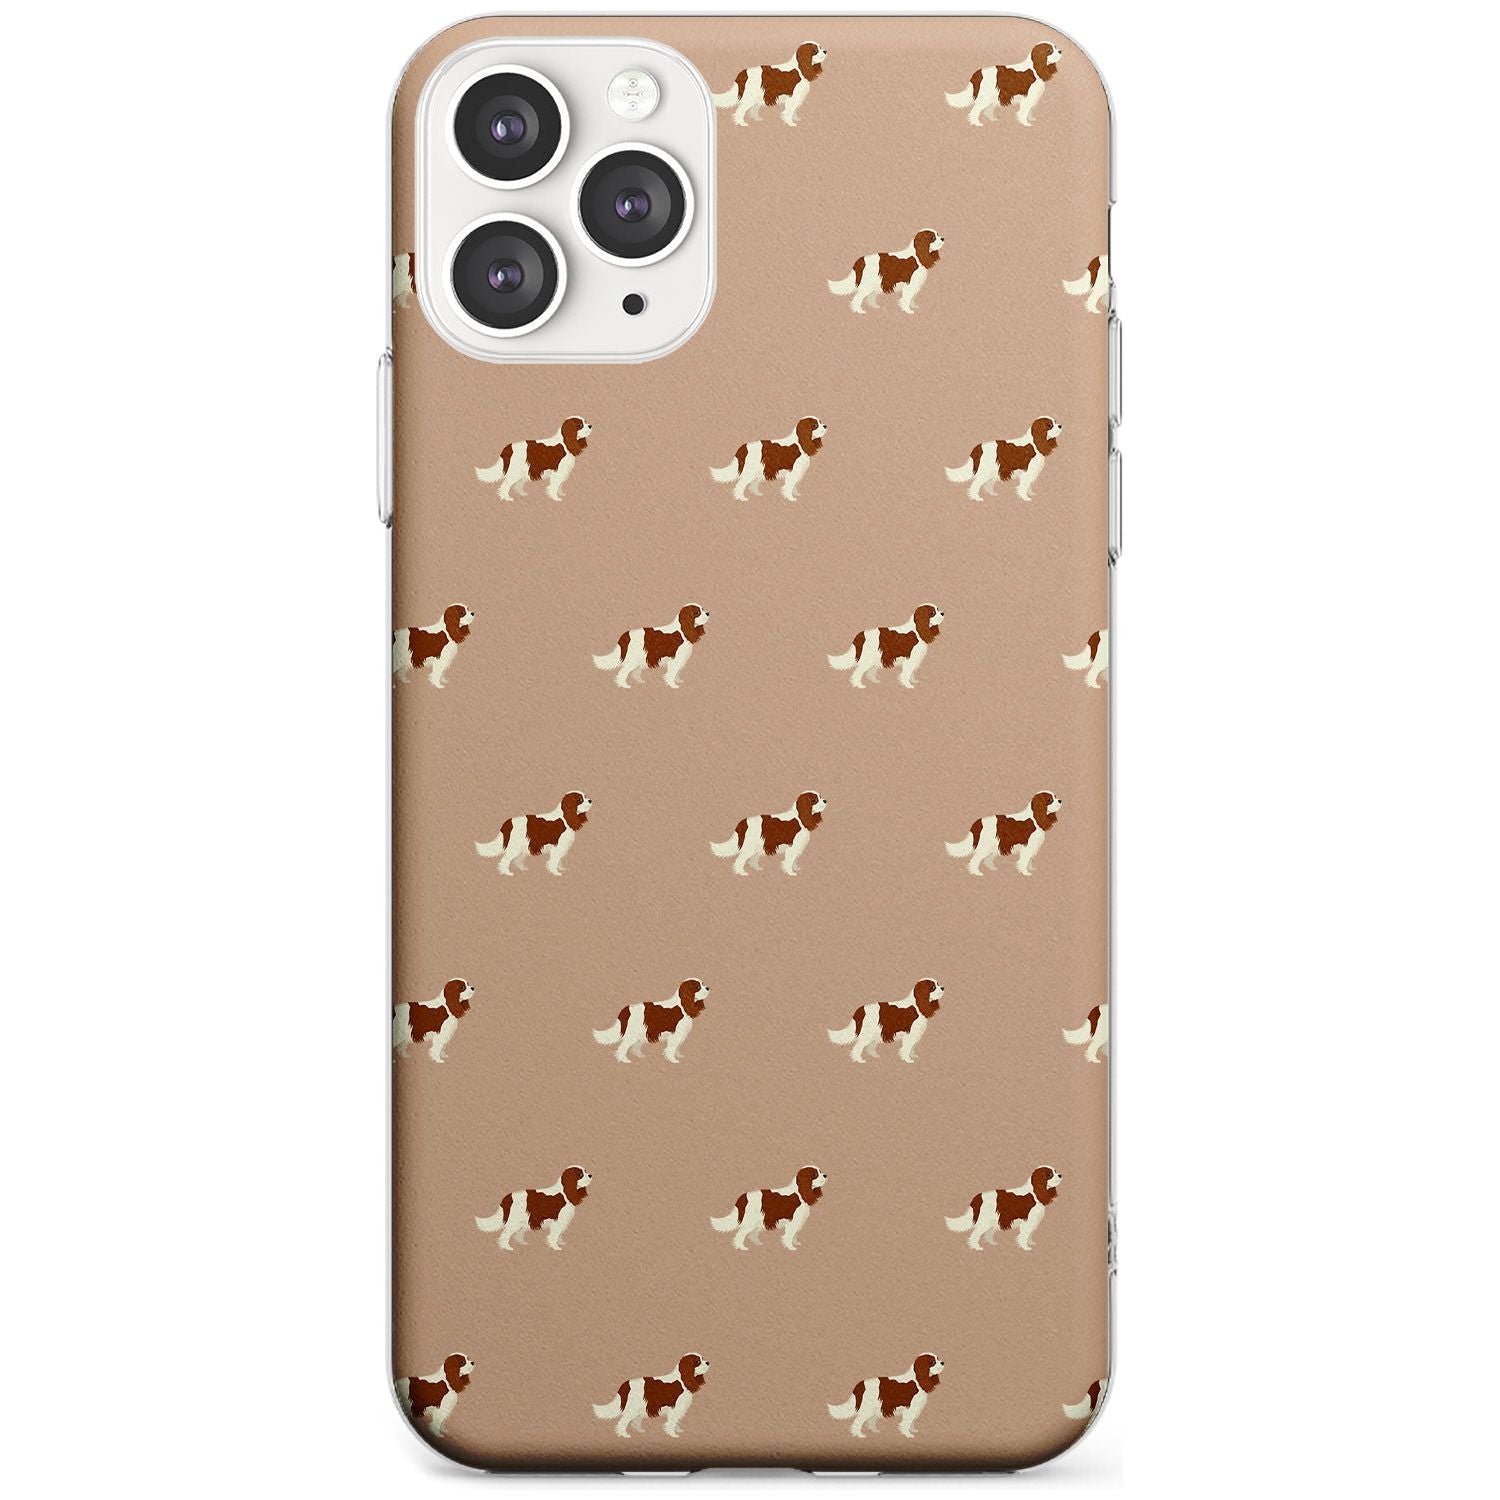 Cavalier King Charles Spaniel Pattern Slim TPU Phone Case for iPhone 11 Pro Max